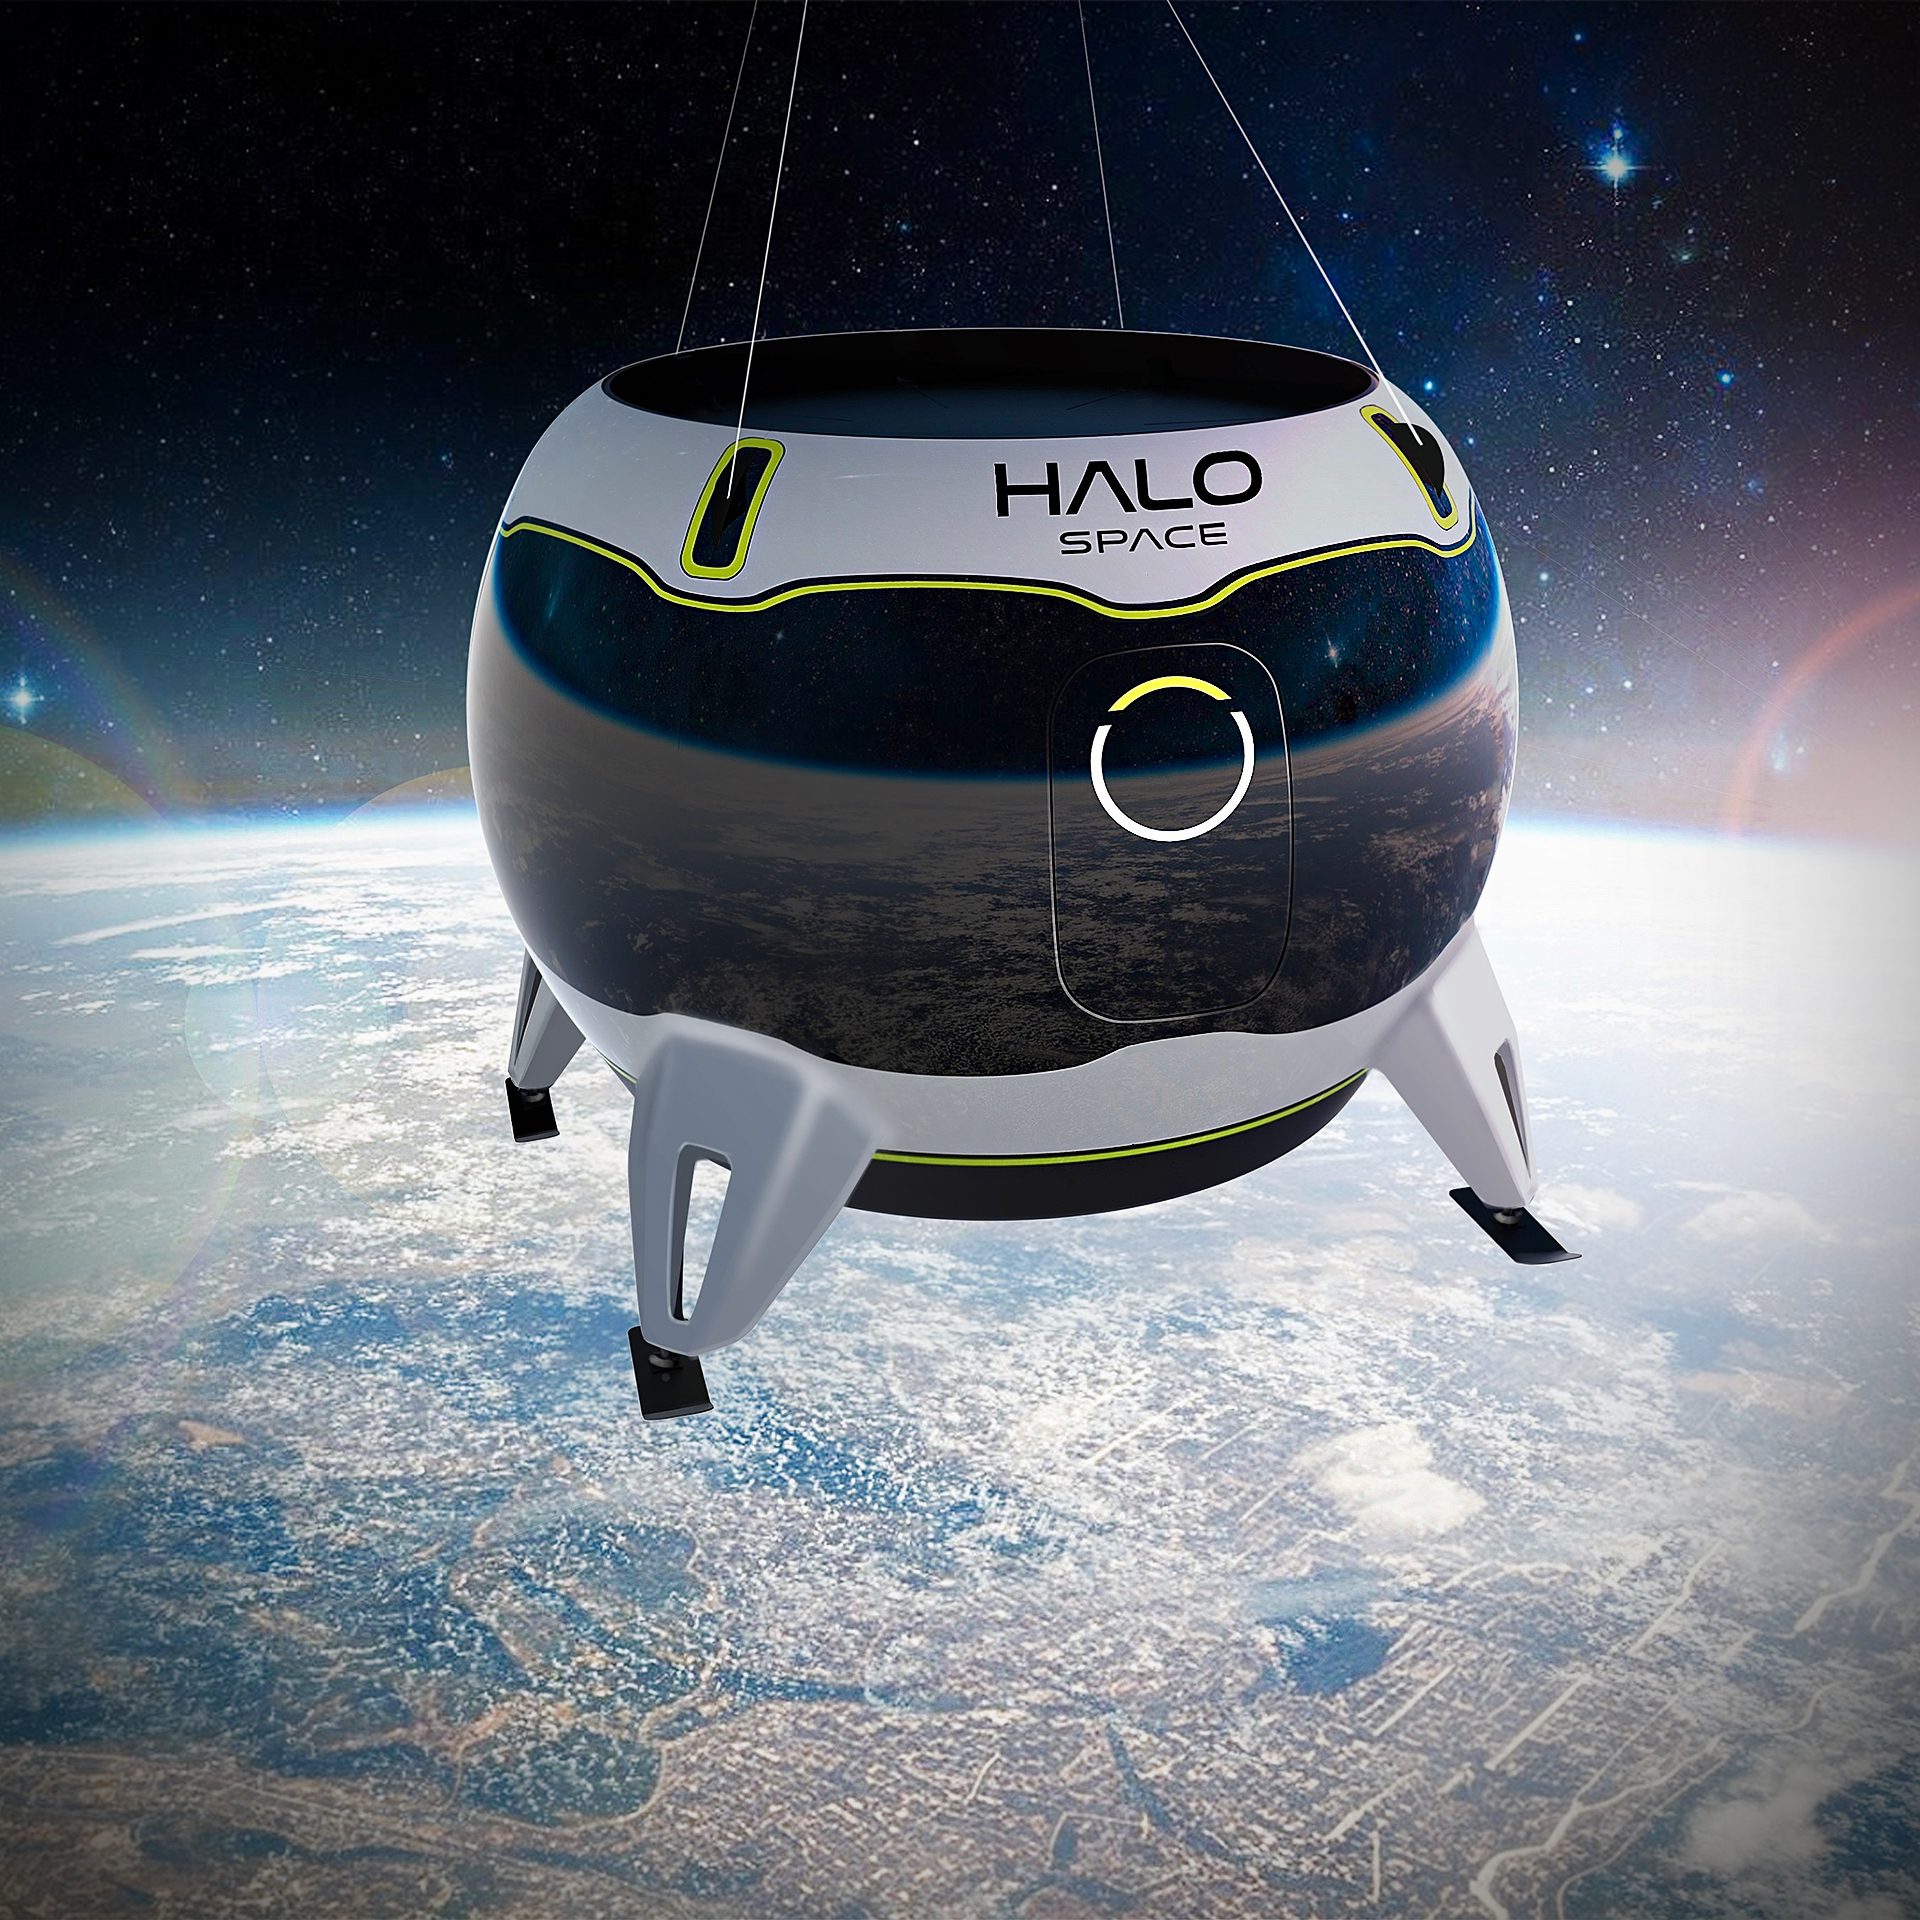 Frank Stephenson Design (FSD) continues its march into future mobility design with its latest project appointment leading the design and build of an aerospace capsule via 360 MAGAZINE.